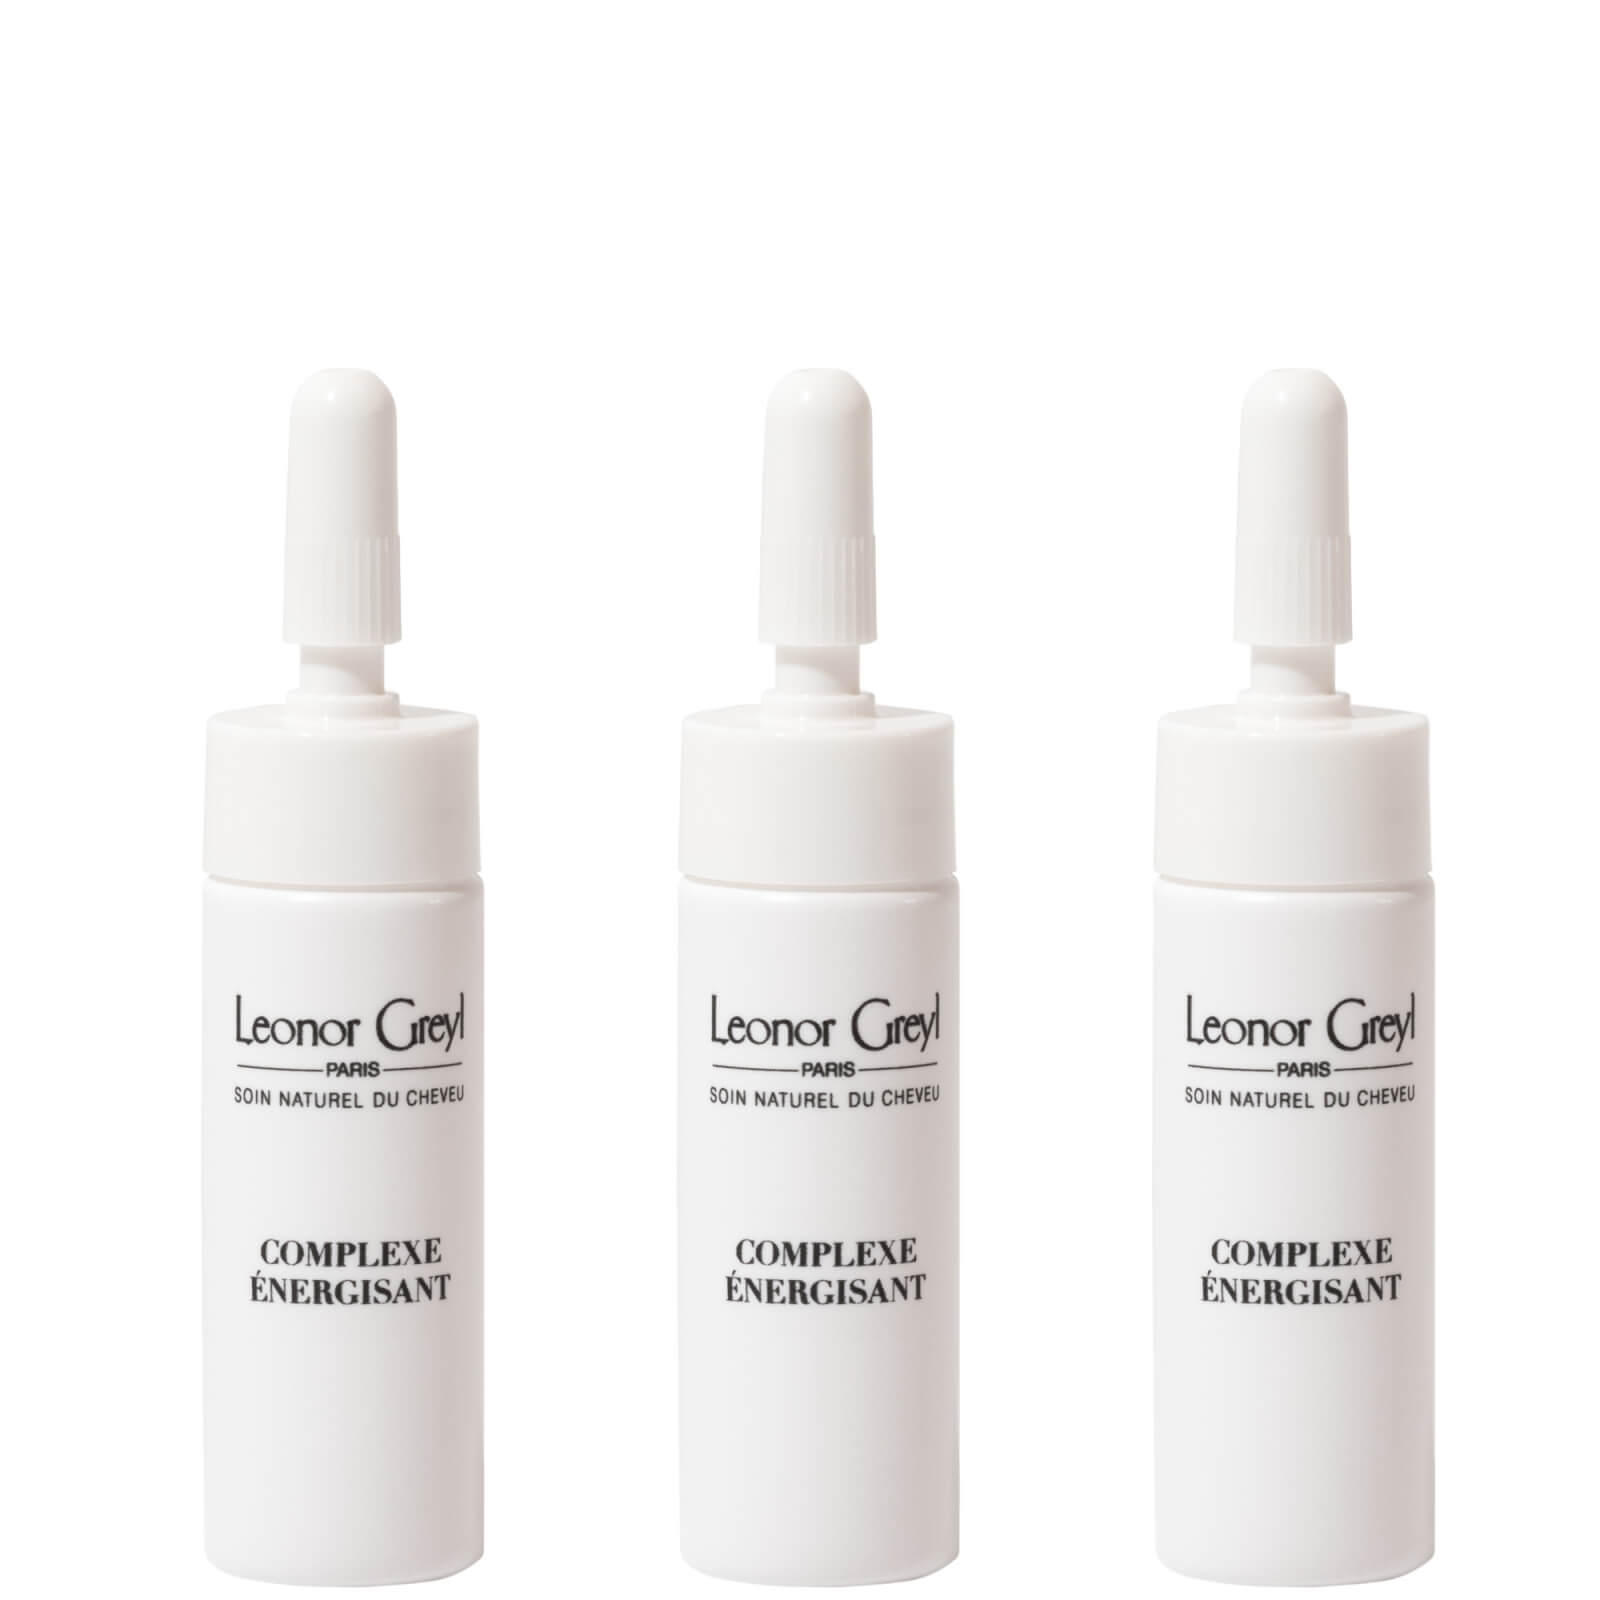 Leonor Greyl Complex Energisant Hair Loss Leave-in Treatment (12 Count) - 12 X 5ml